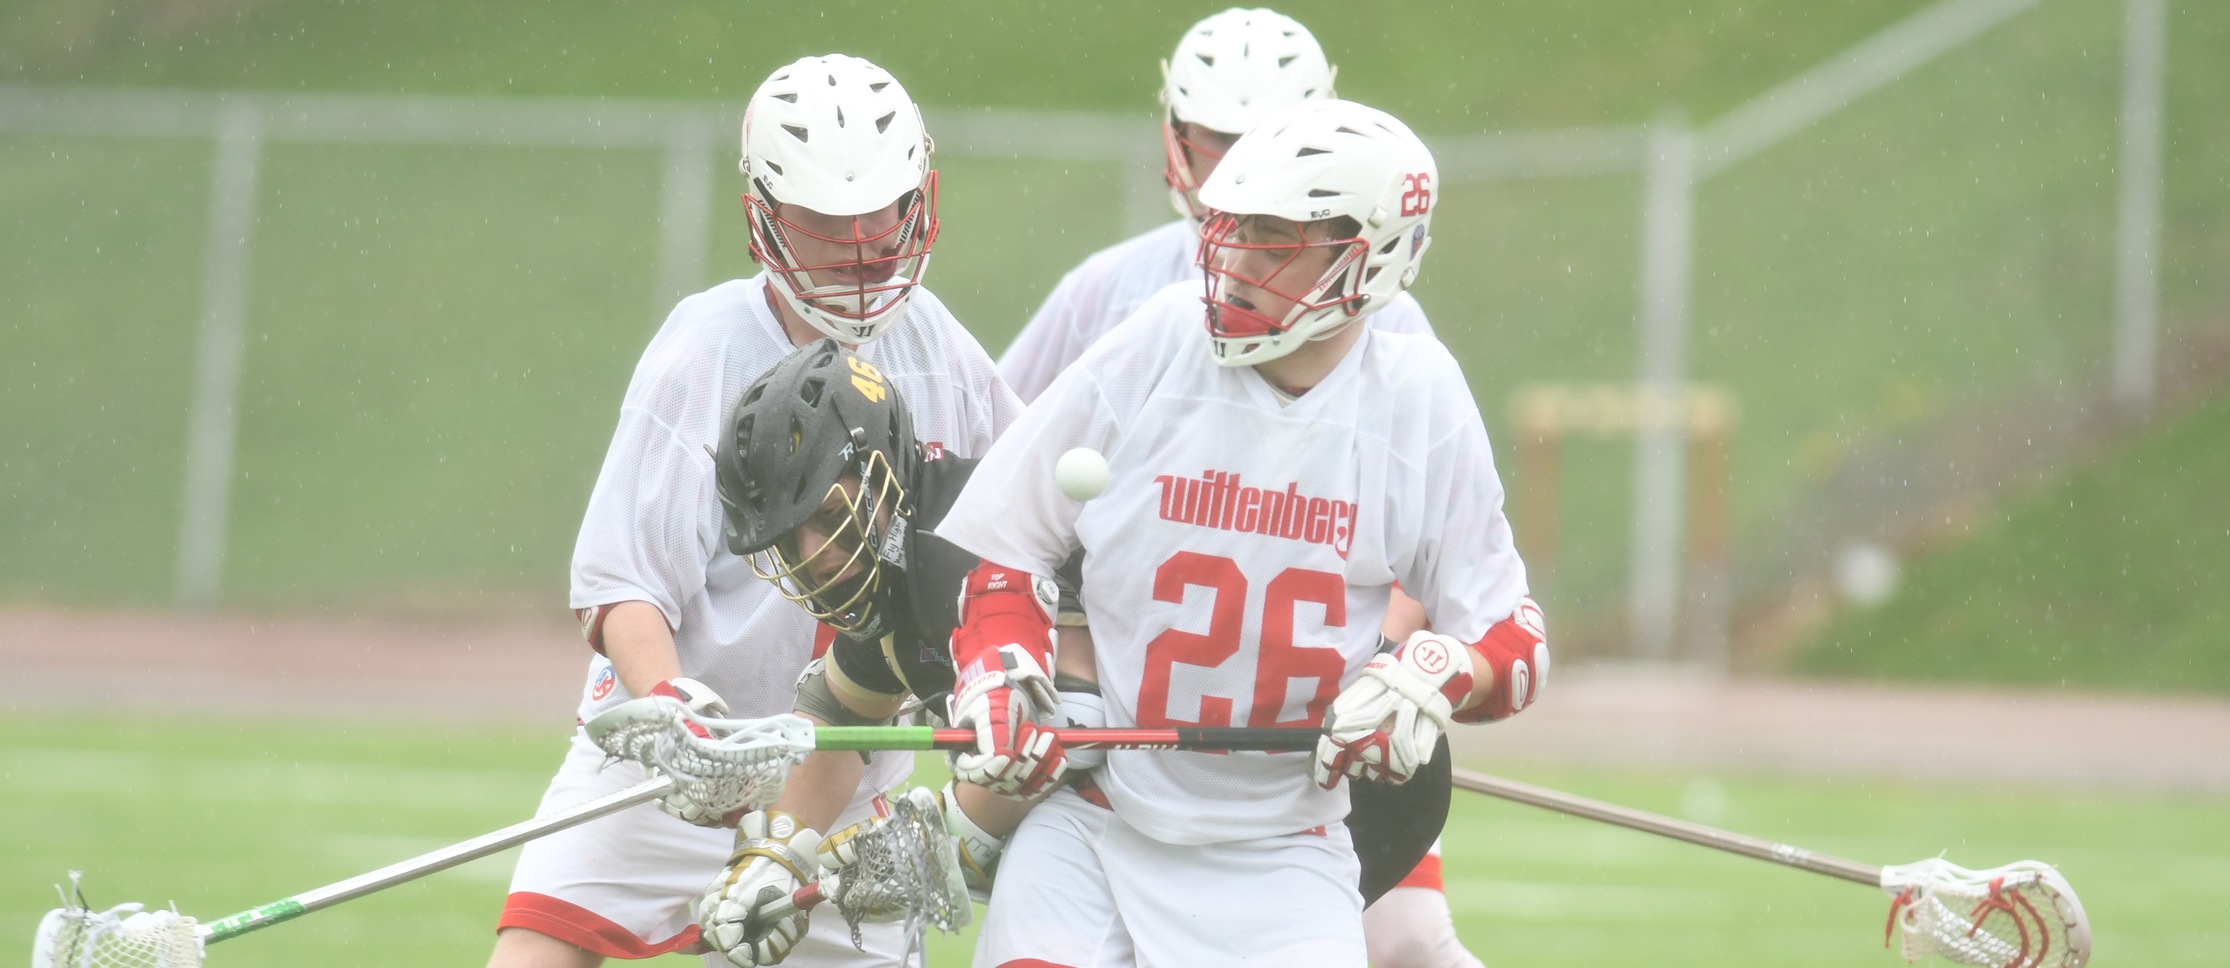 Men's Lacrosse Comes From Behind to Top Wooster 12-11